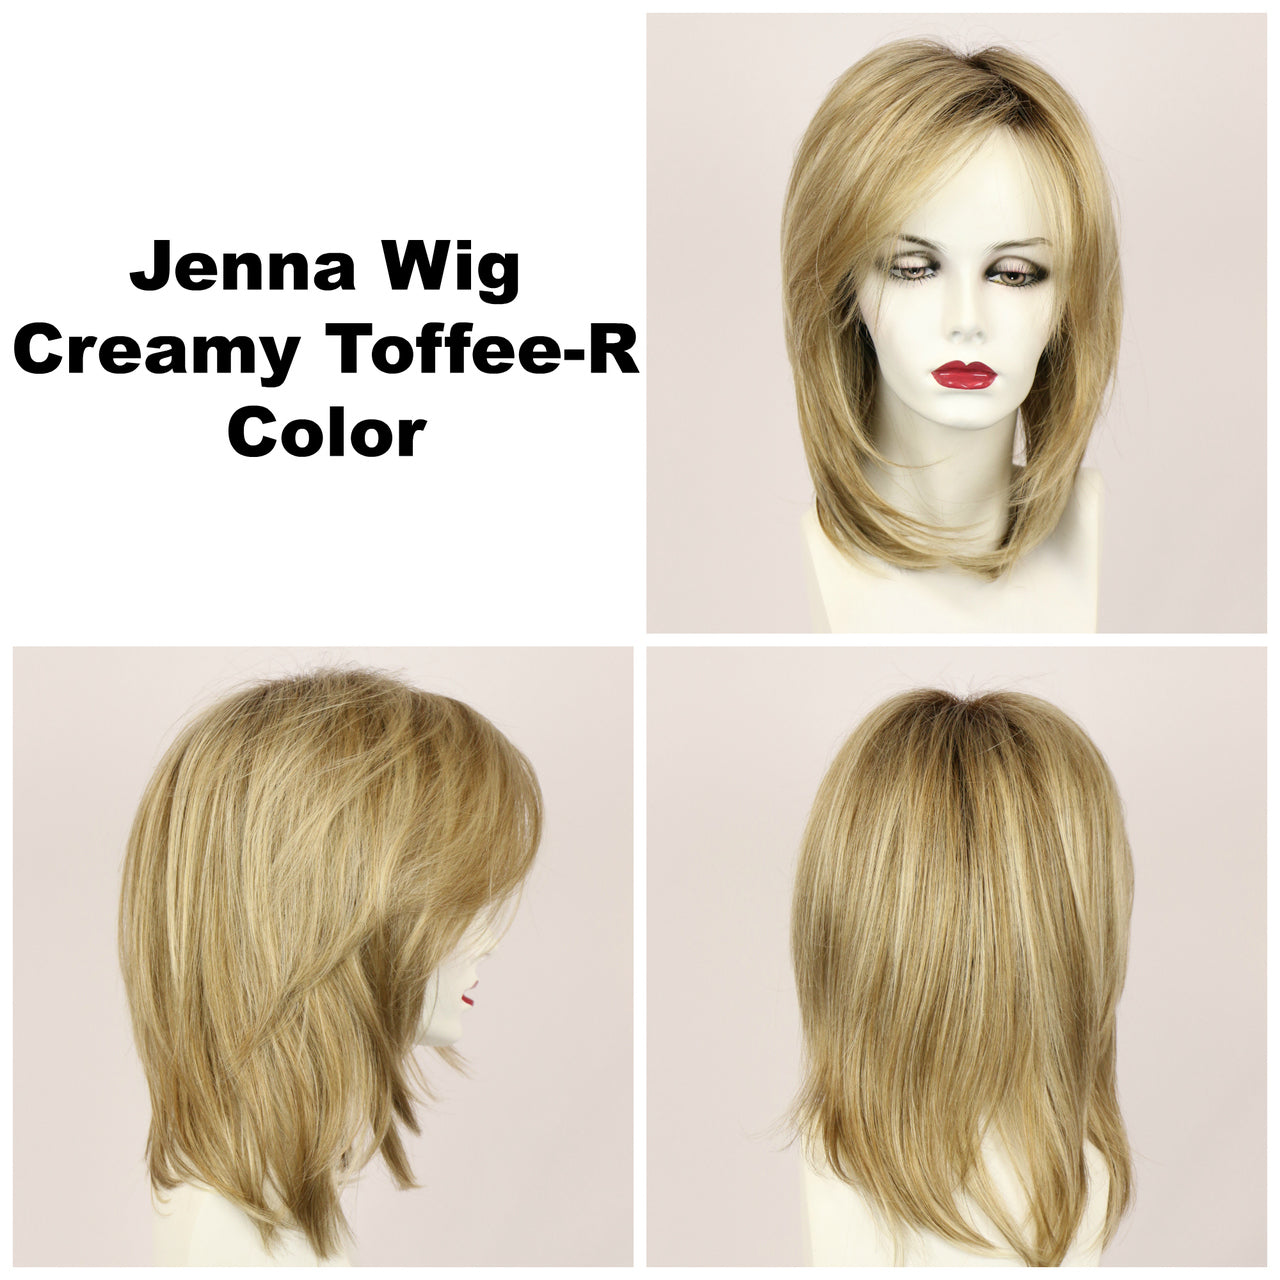 Creamy Toffee-R / Jenna w/ Roots / Long Wig